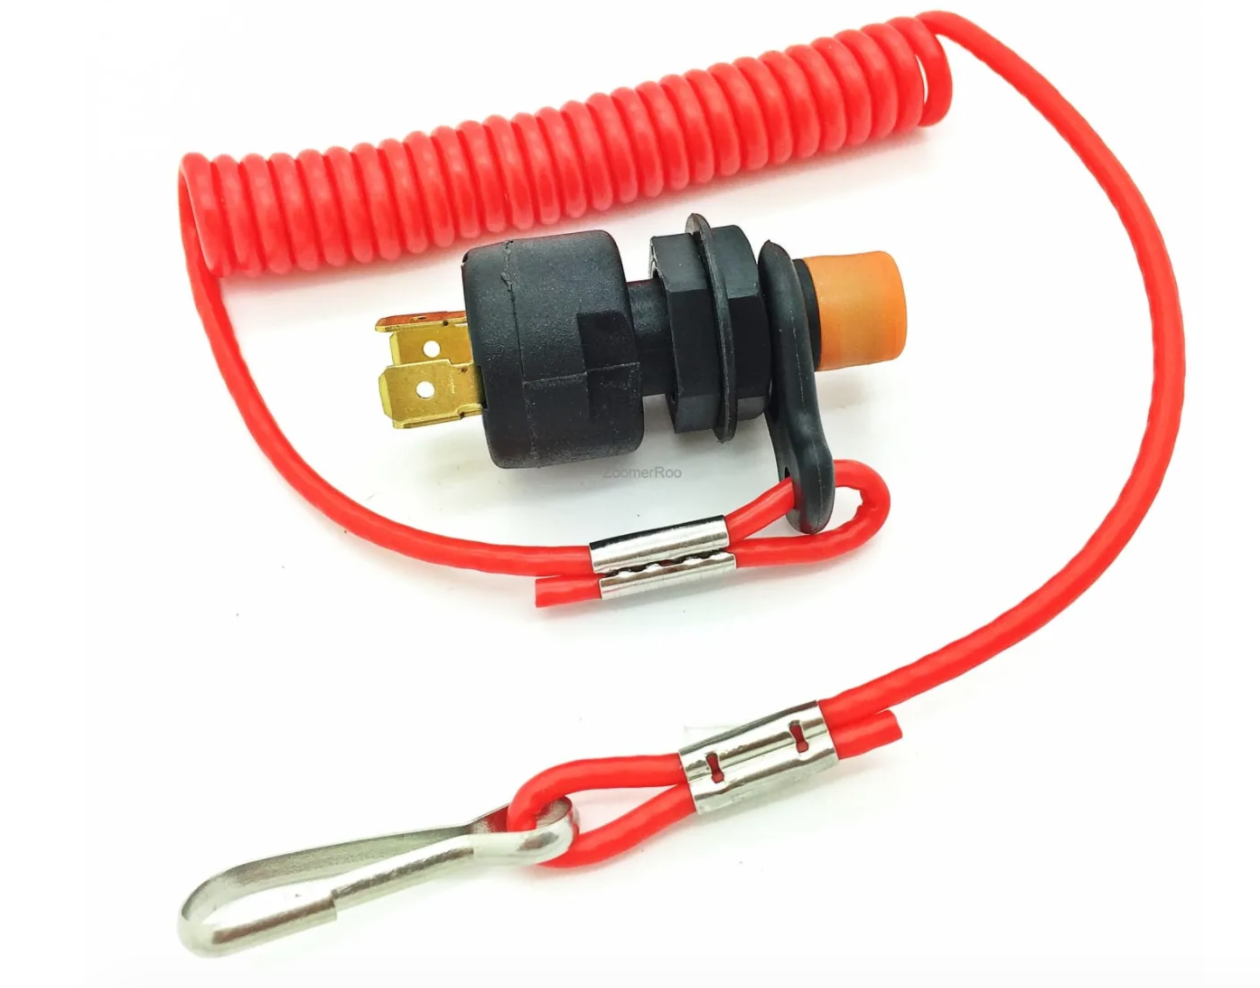 Invincible Marine Kill Switch with Lanyard